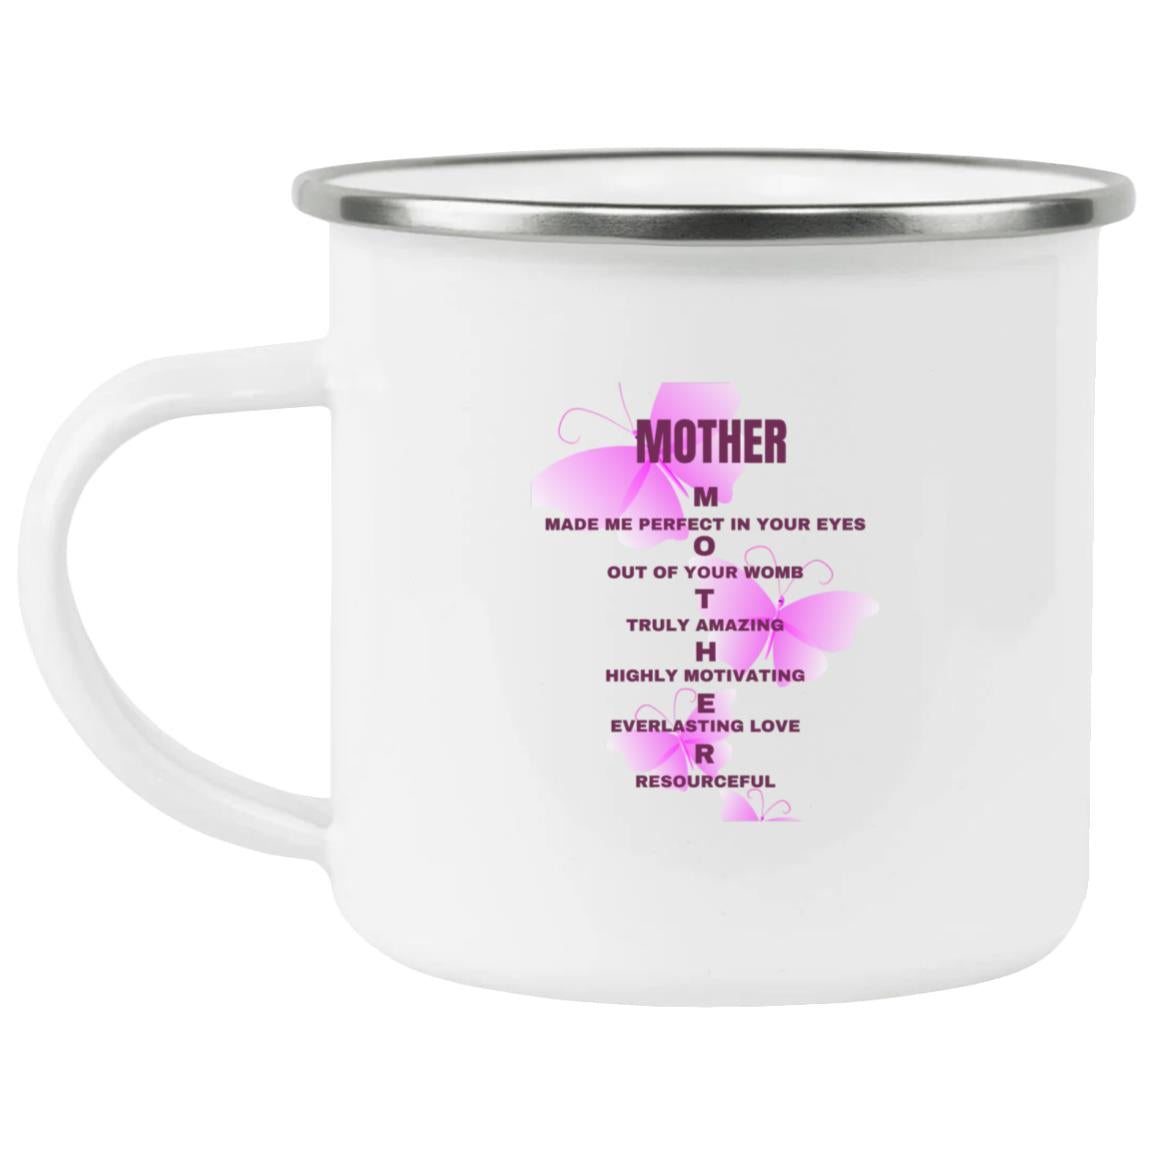 Mother's  Stainless Steel Mug| For Mom| For Mother's Day| Wife| For Mom's Birthday For Christmas